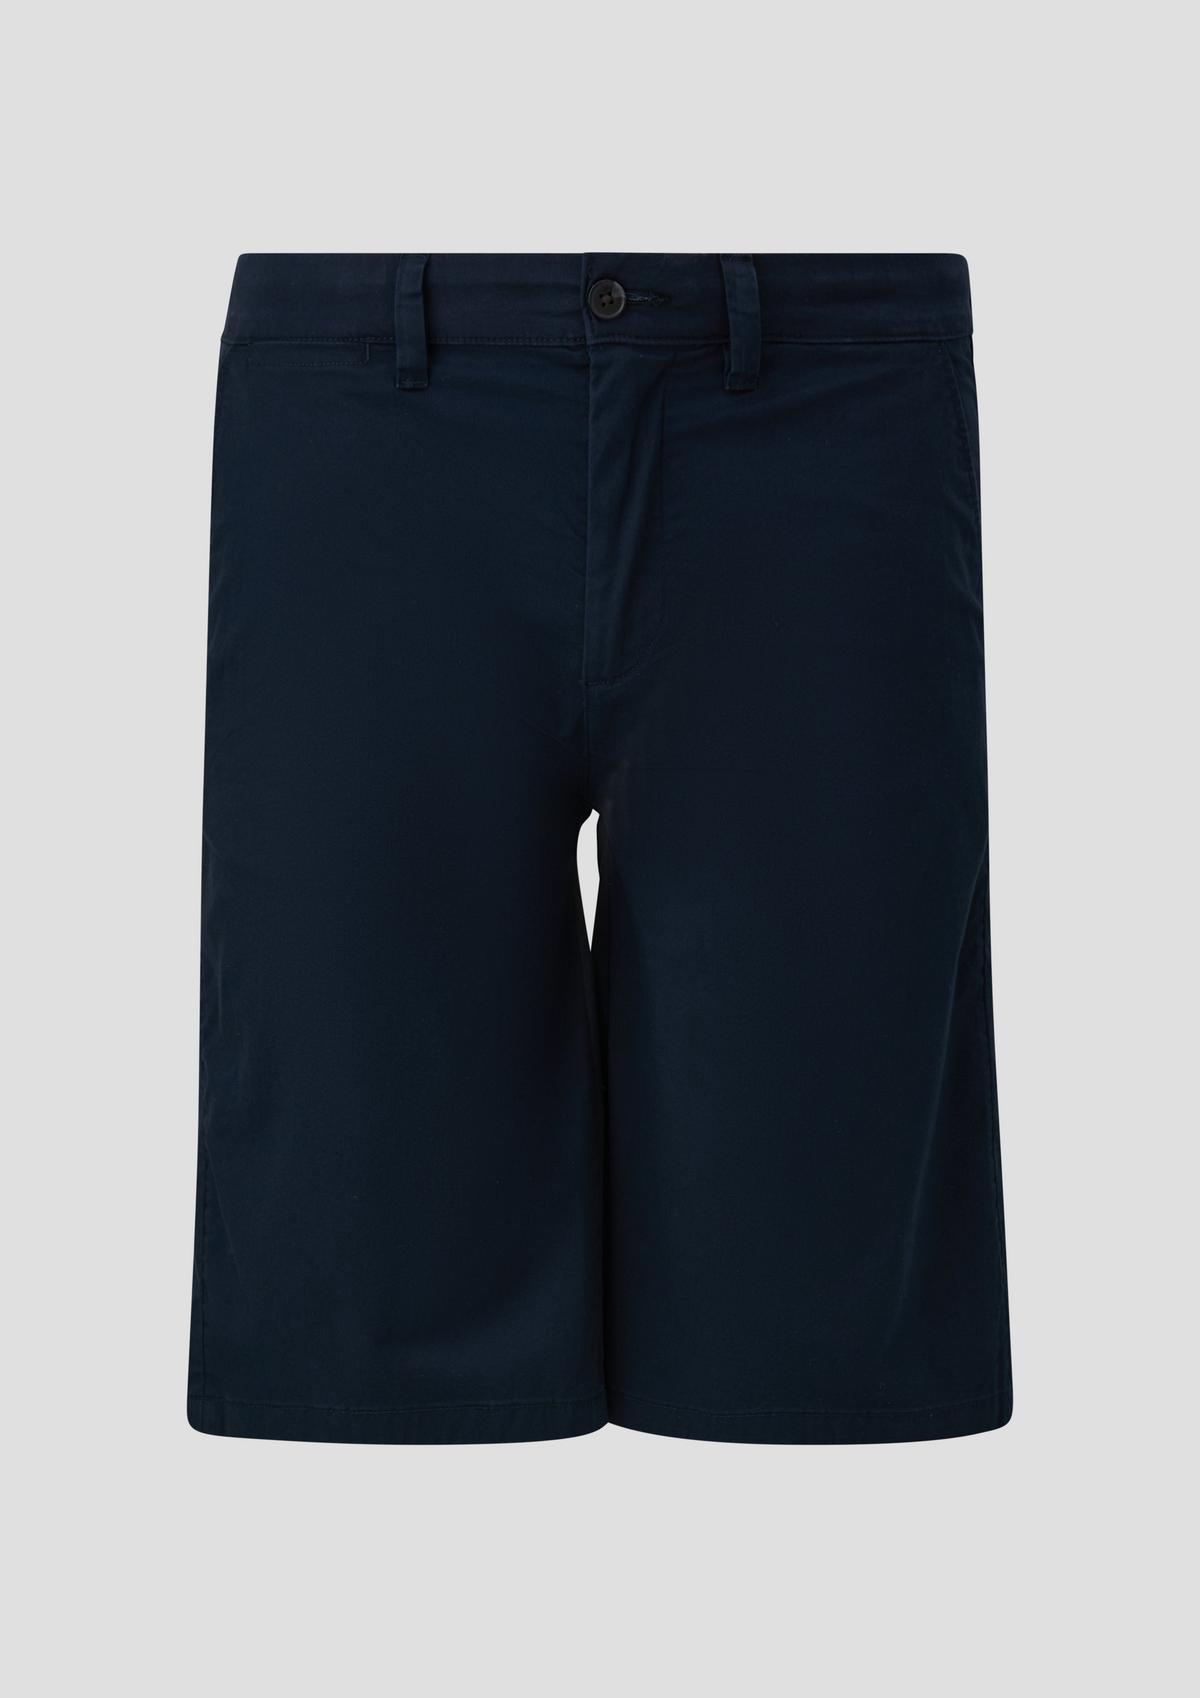 s.Oliver Bermuda shorts with a straight leg